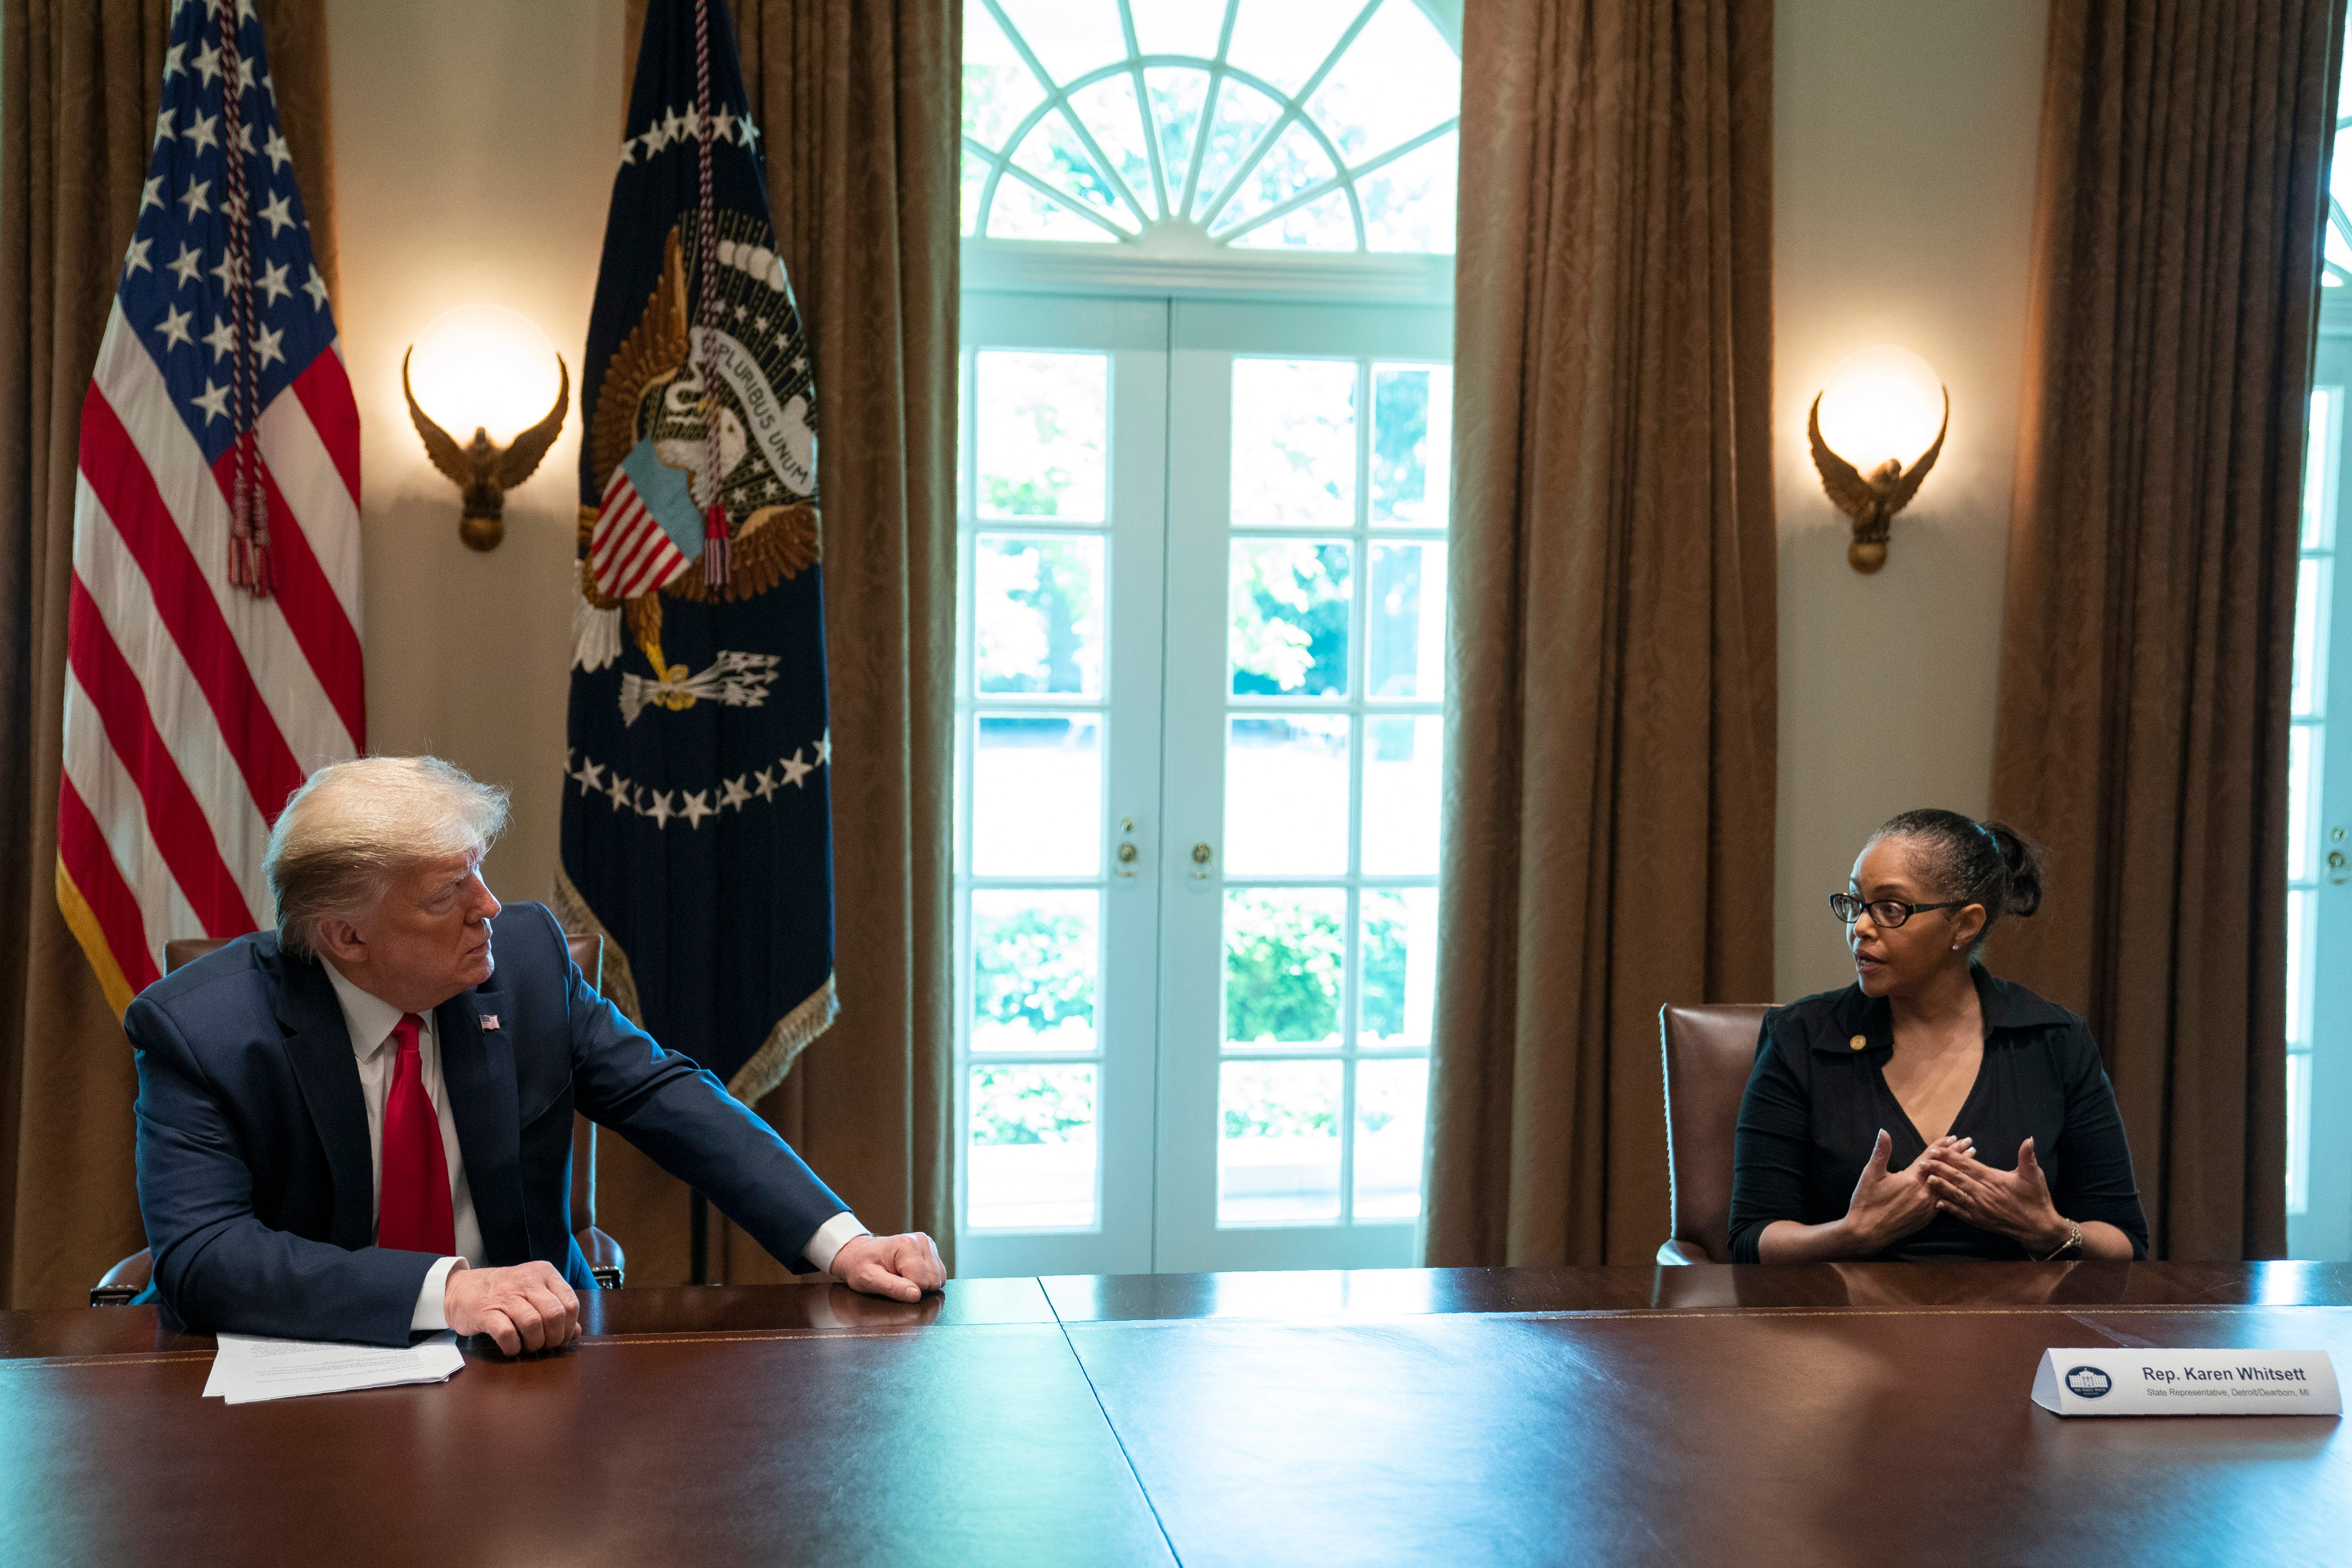 President Donald Trump listens as Karen Whitsett shares her story of recovery from COVID-19, in the Cabinet Room of the White House, Tuesday, April 14, 2020, in Washington.